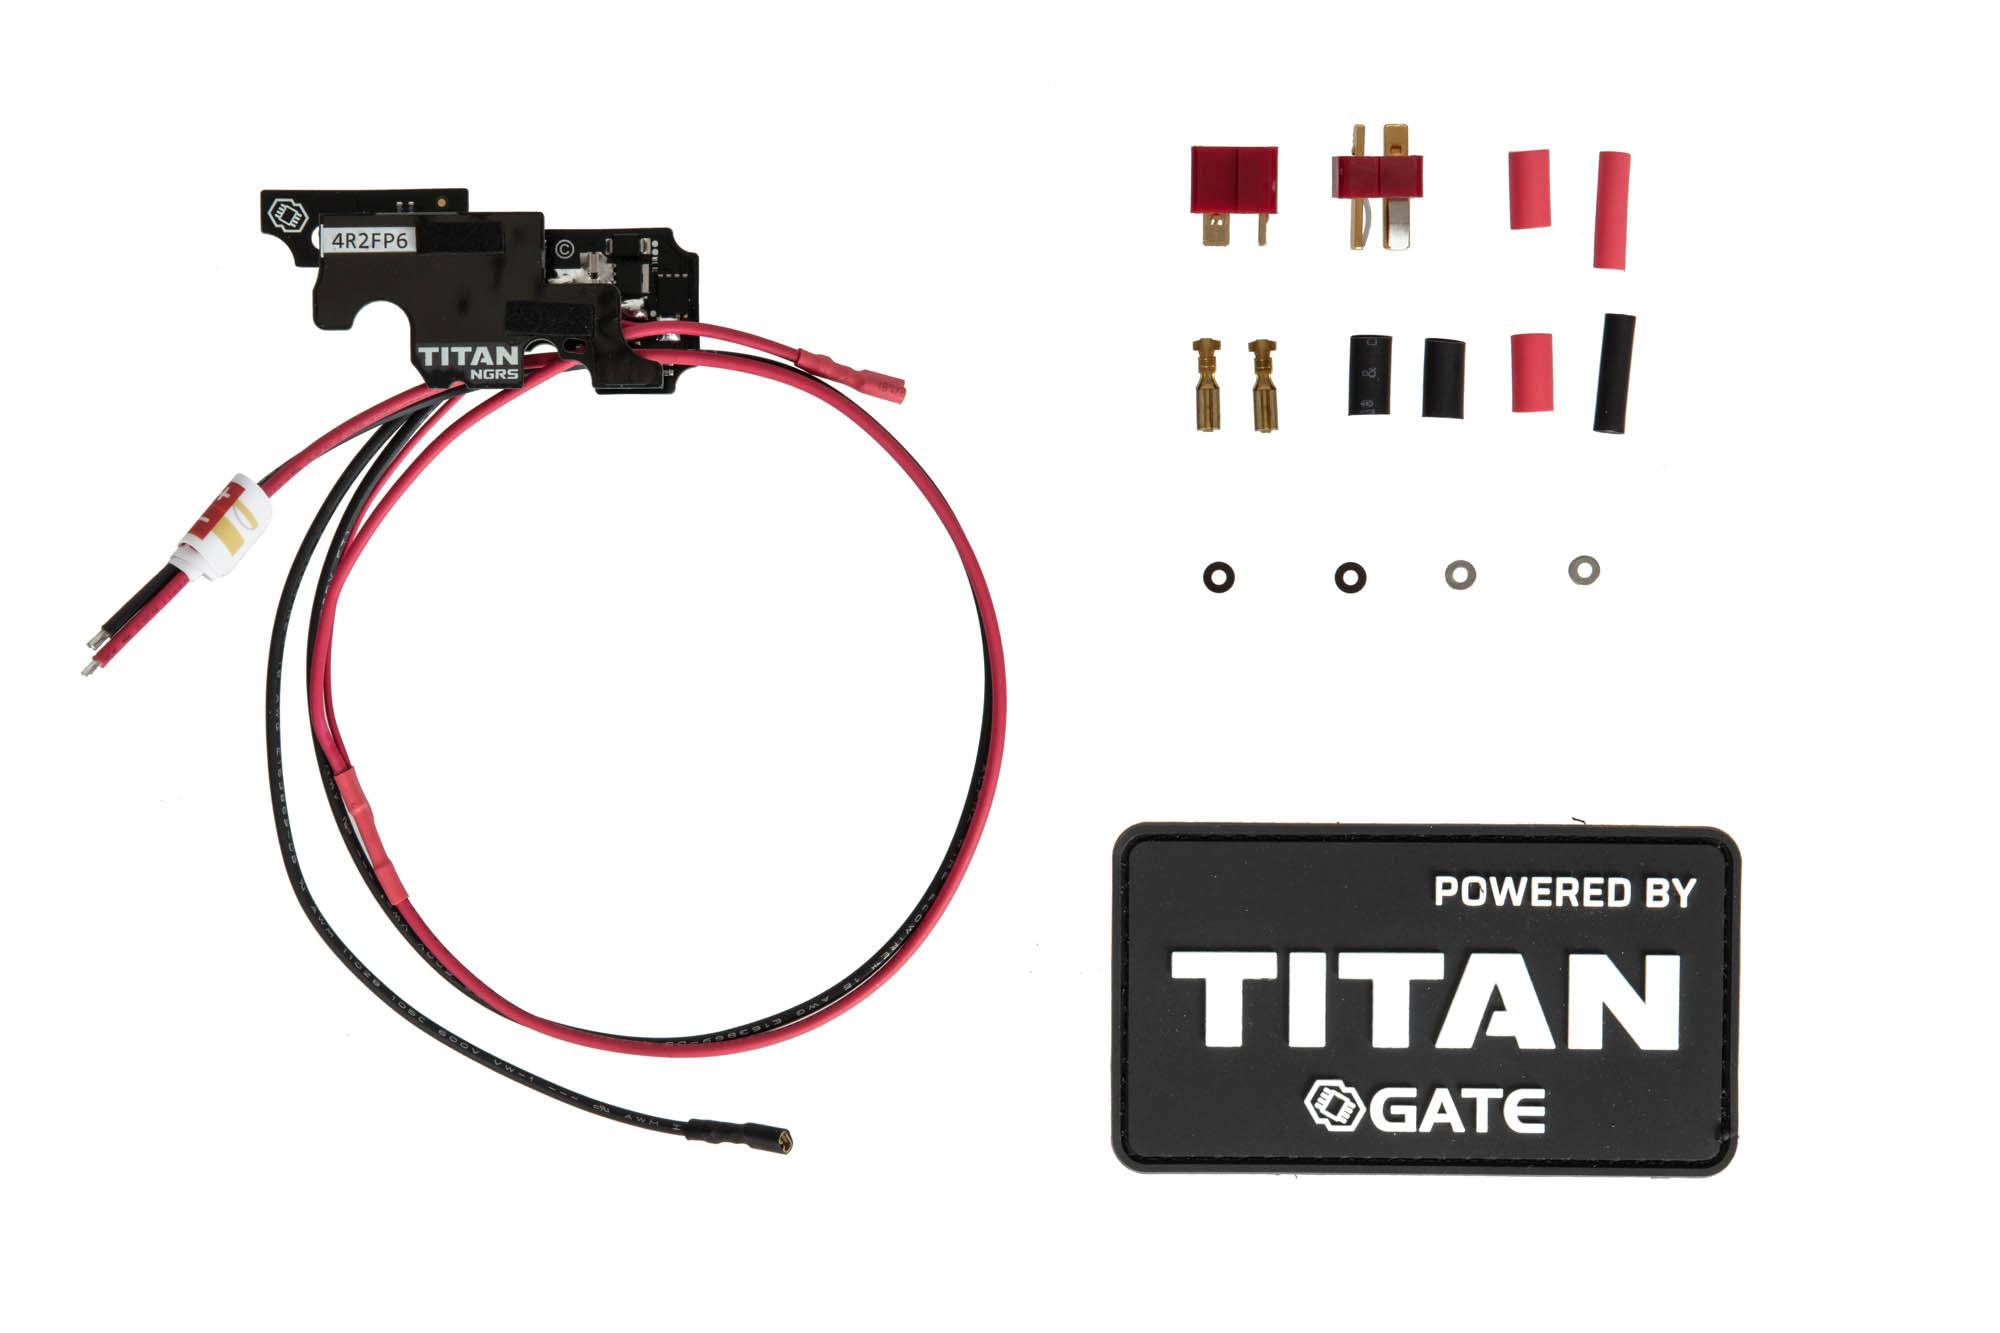 TITAN ™ V2 NGRS BASIC [Rear Wired] Controller Set by GATE on Airsoft Mania Europe